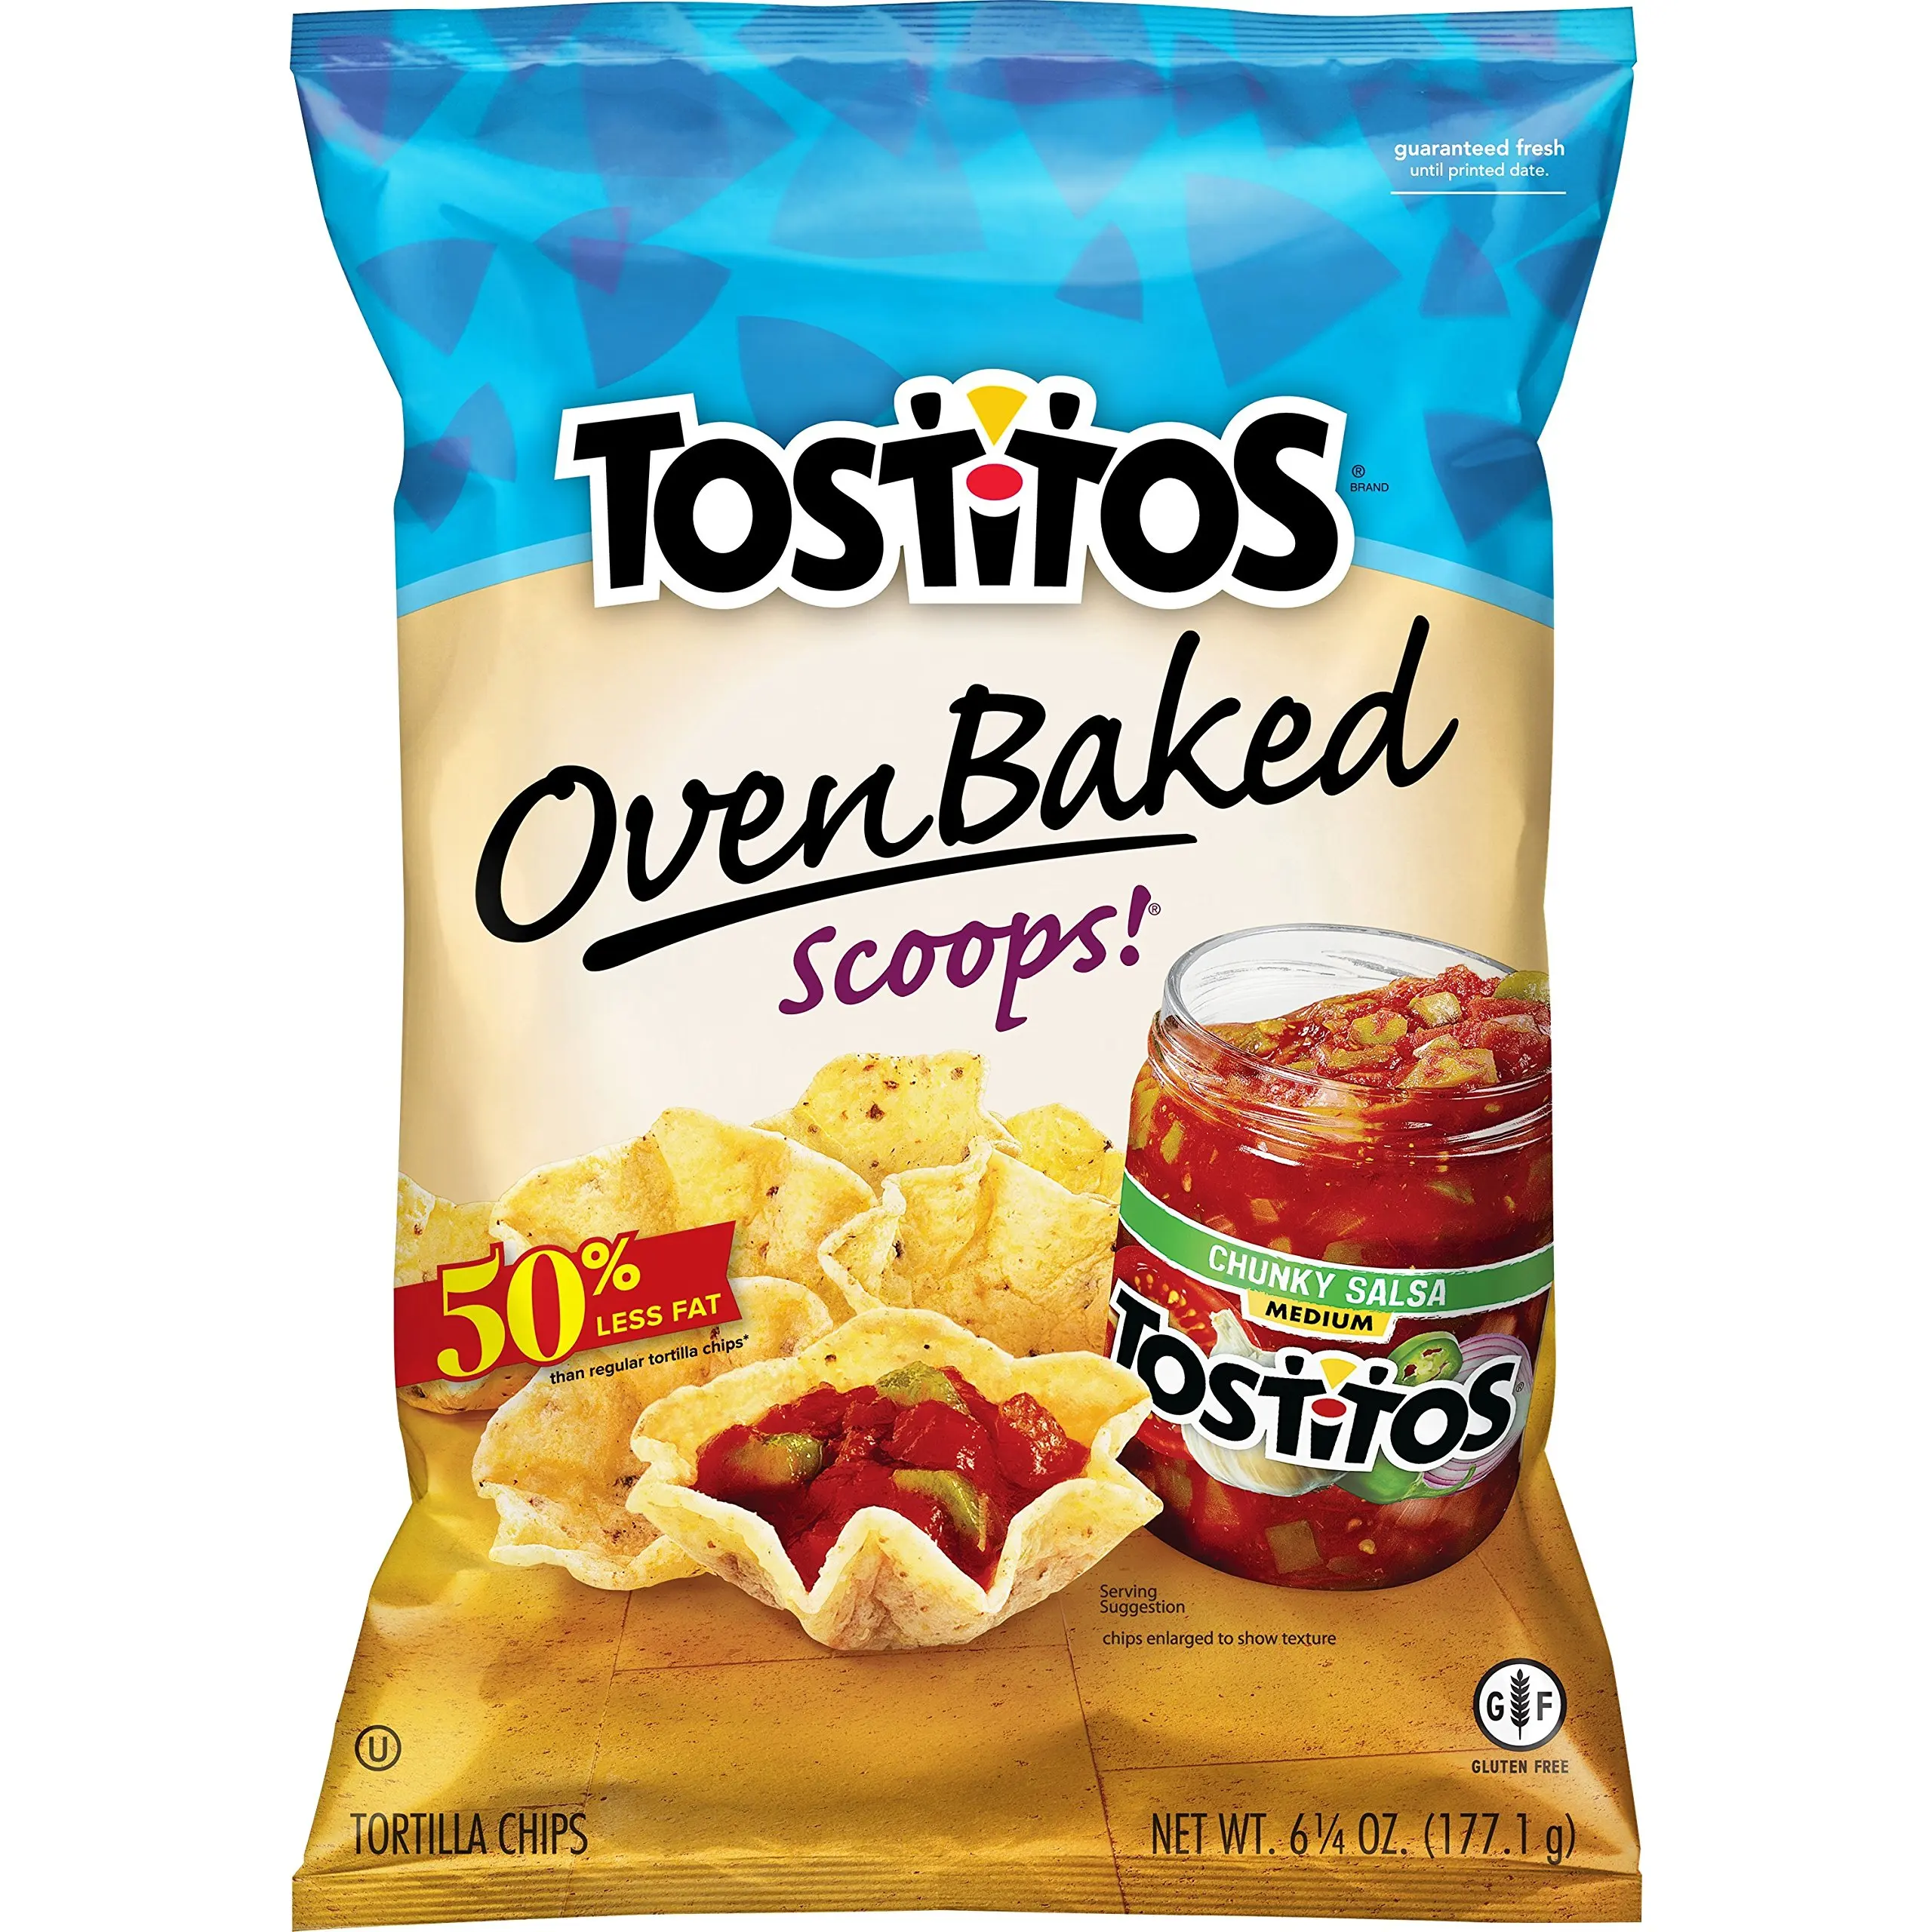 Tostitos Oven Baked Tortilla Chips, Scoops, 6.25 Ounce.